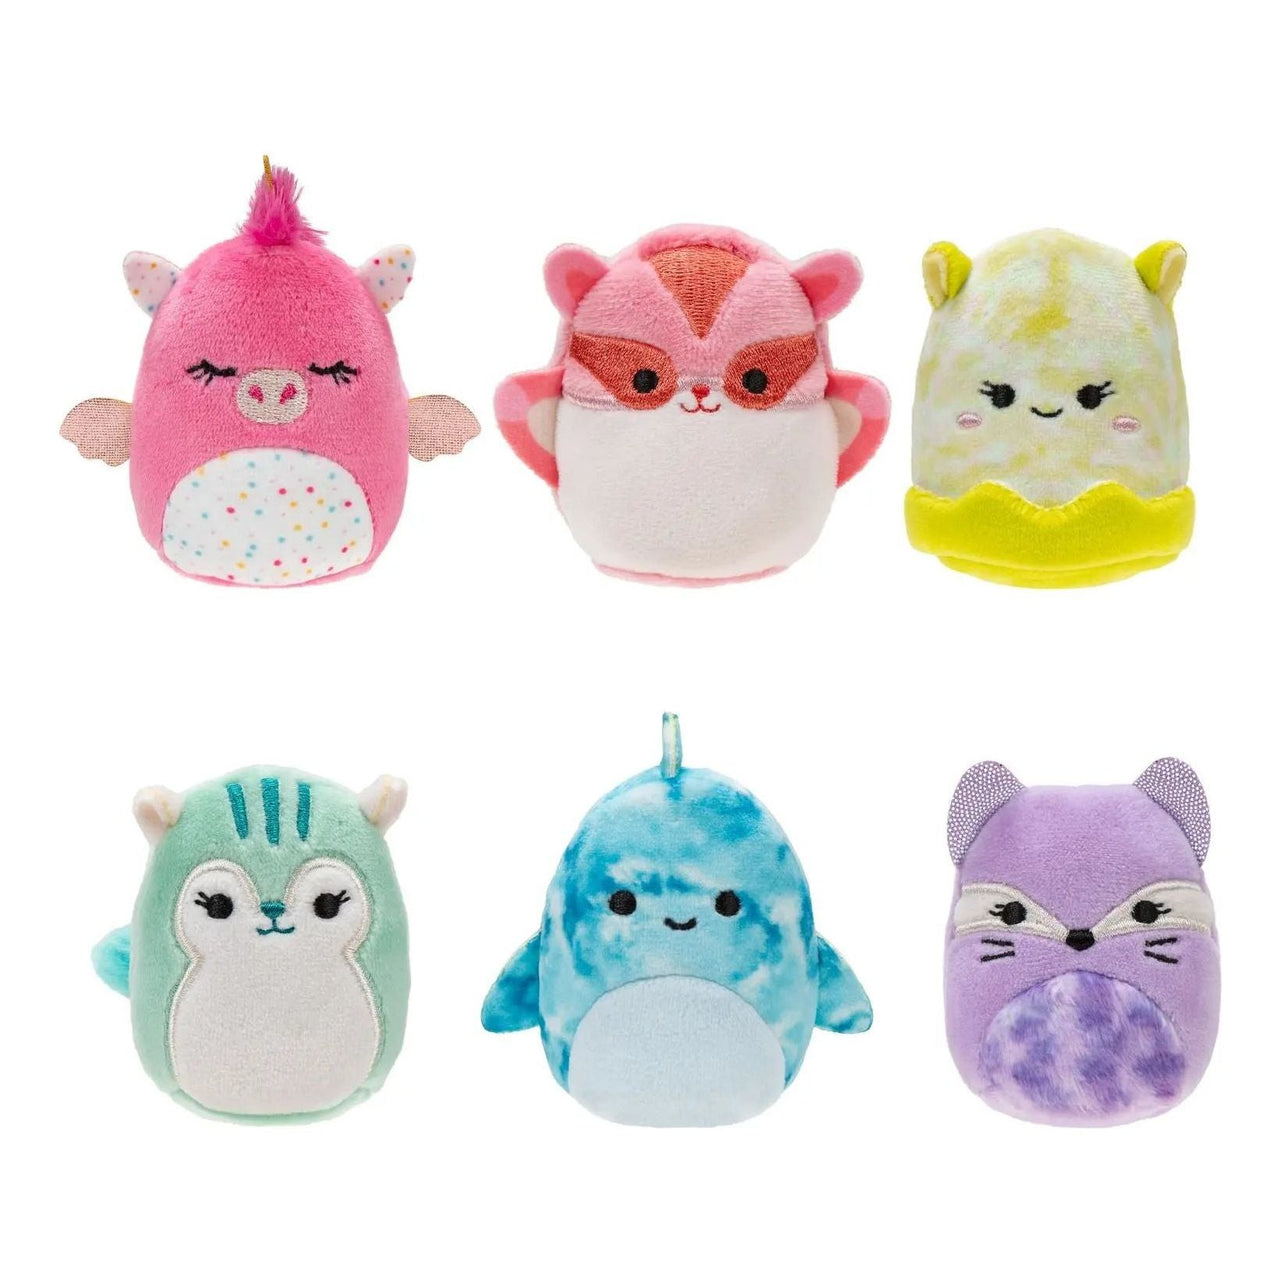 Squishville 2" Cute & Colourful 6 Pack Squishmallows